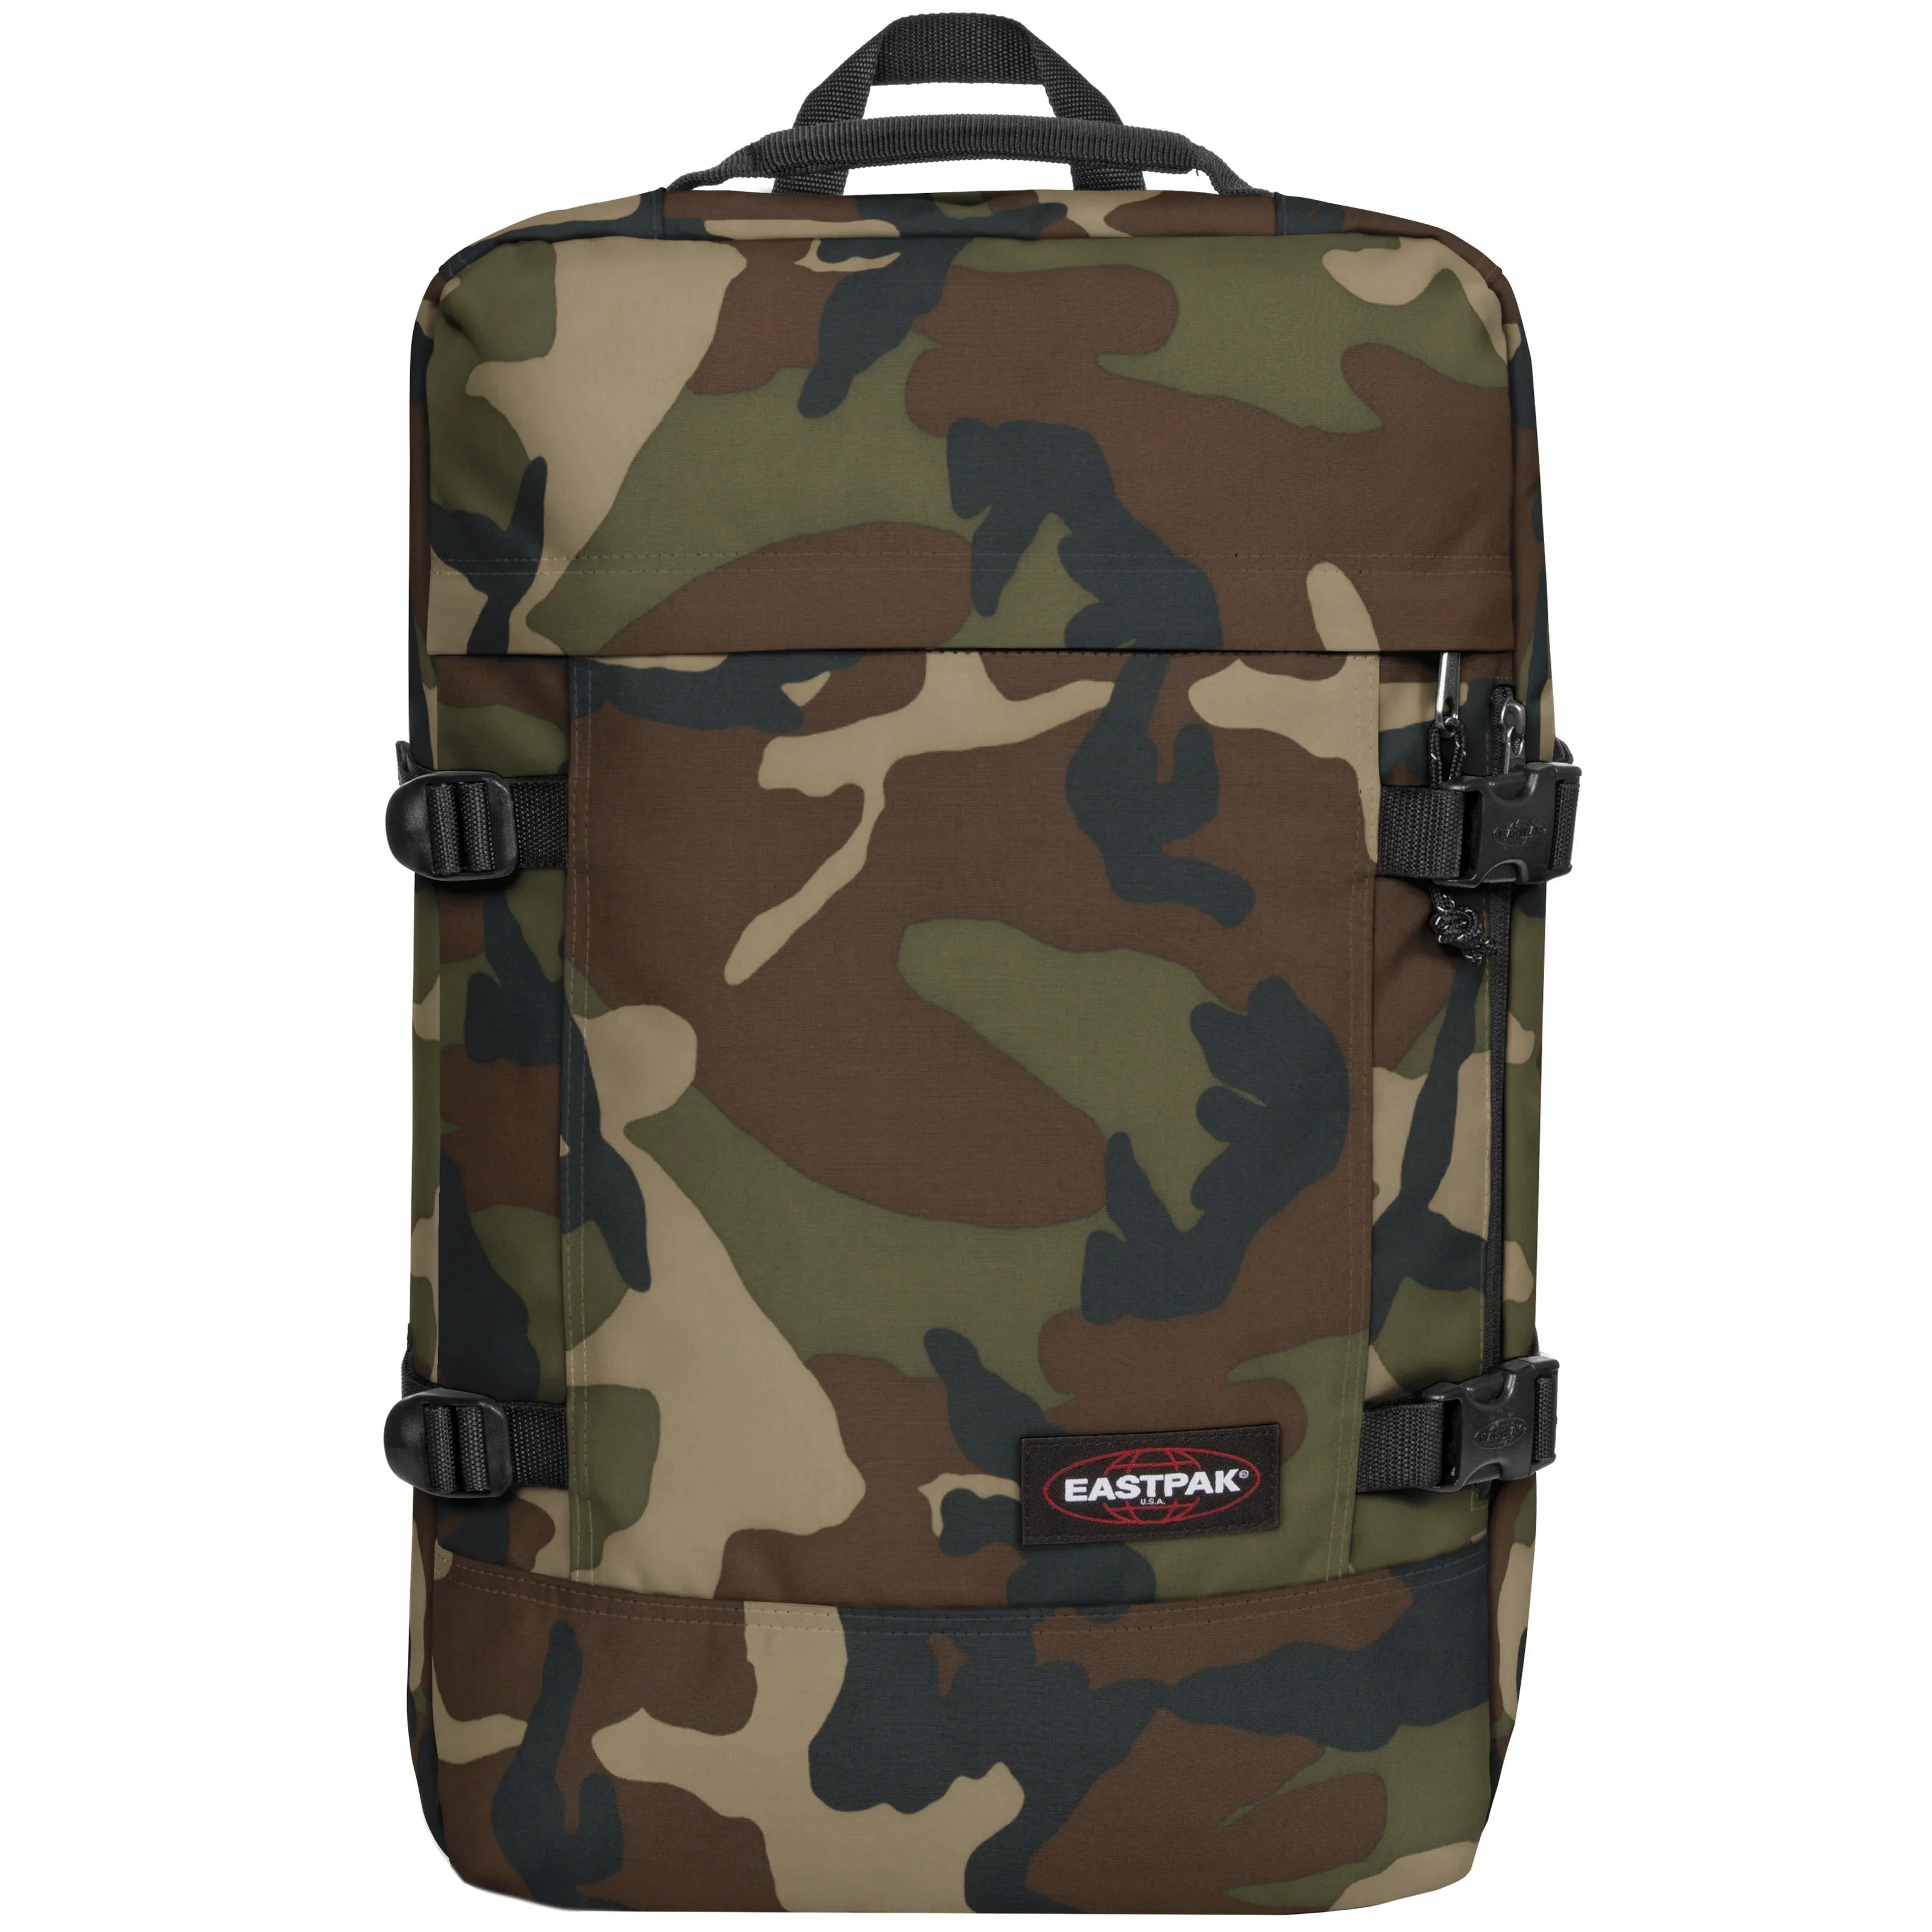 Eastpak Authentic Tranzpack Backpack 51 cm - Camo